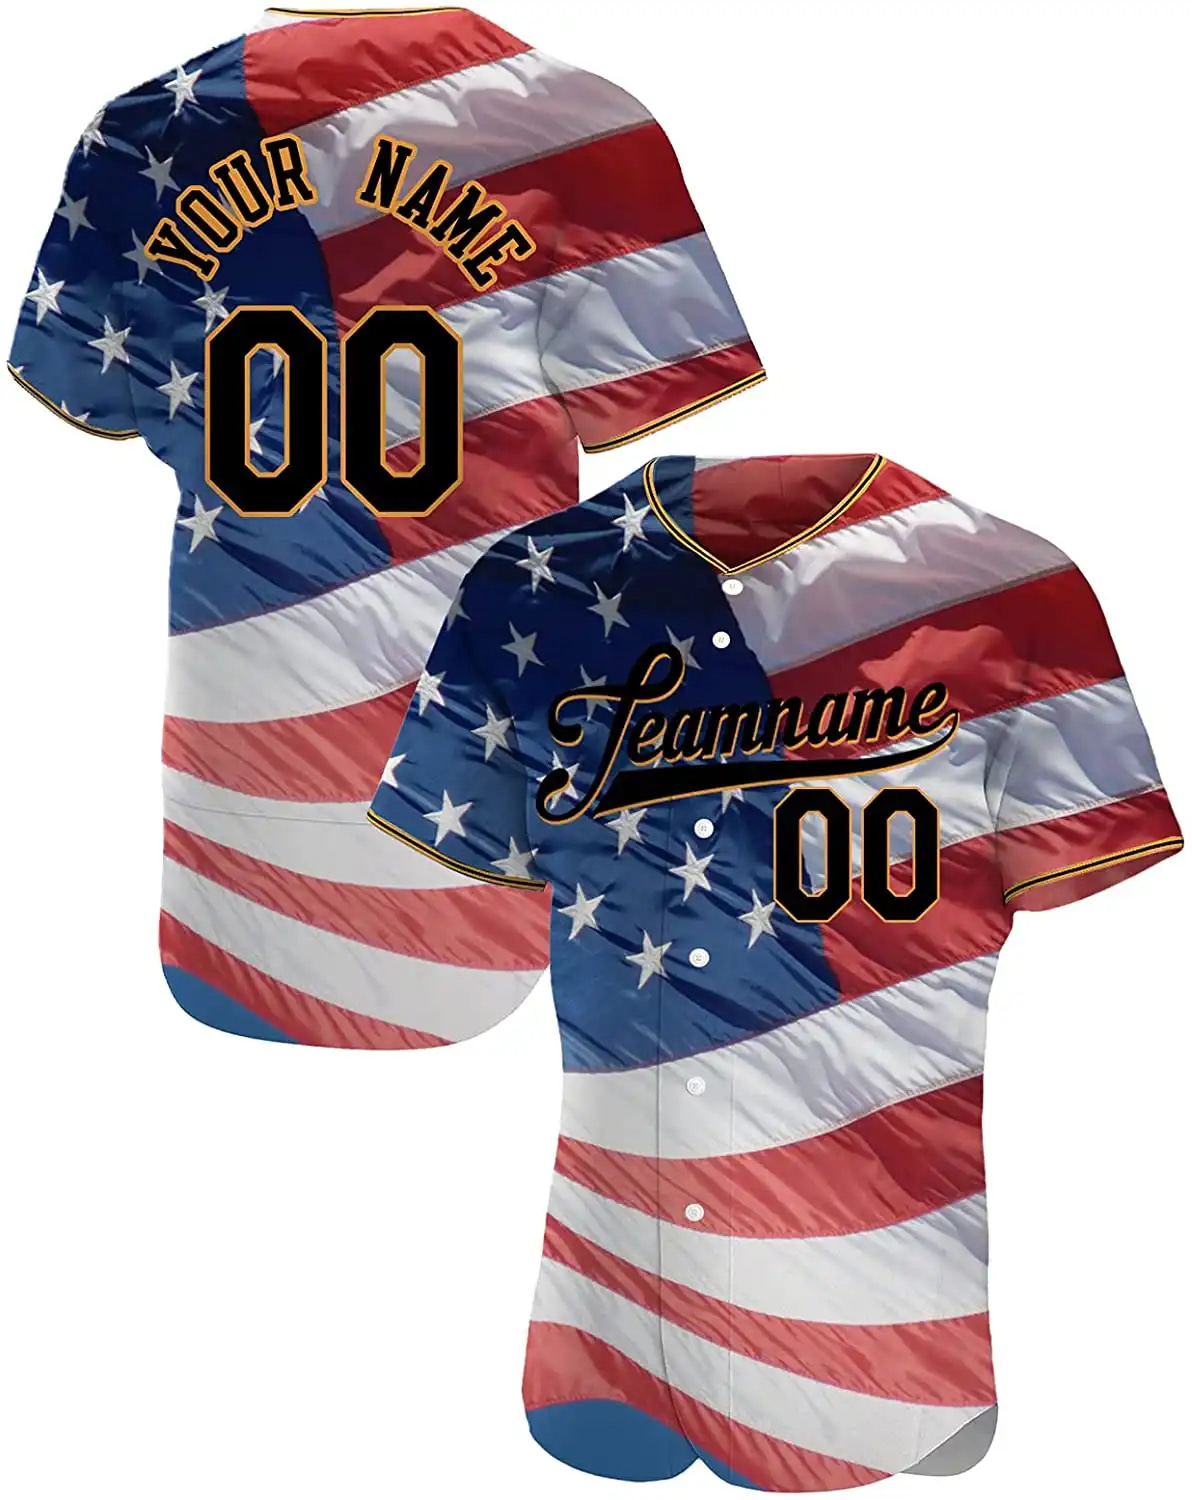 Personalized Us Flag Printed Name And Number Idea Gift For Fans Baseball Jersey